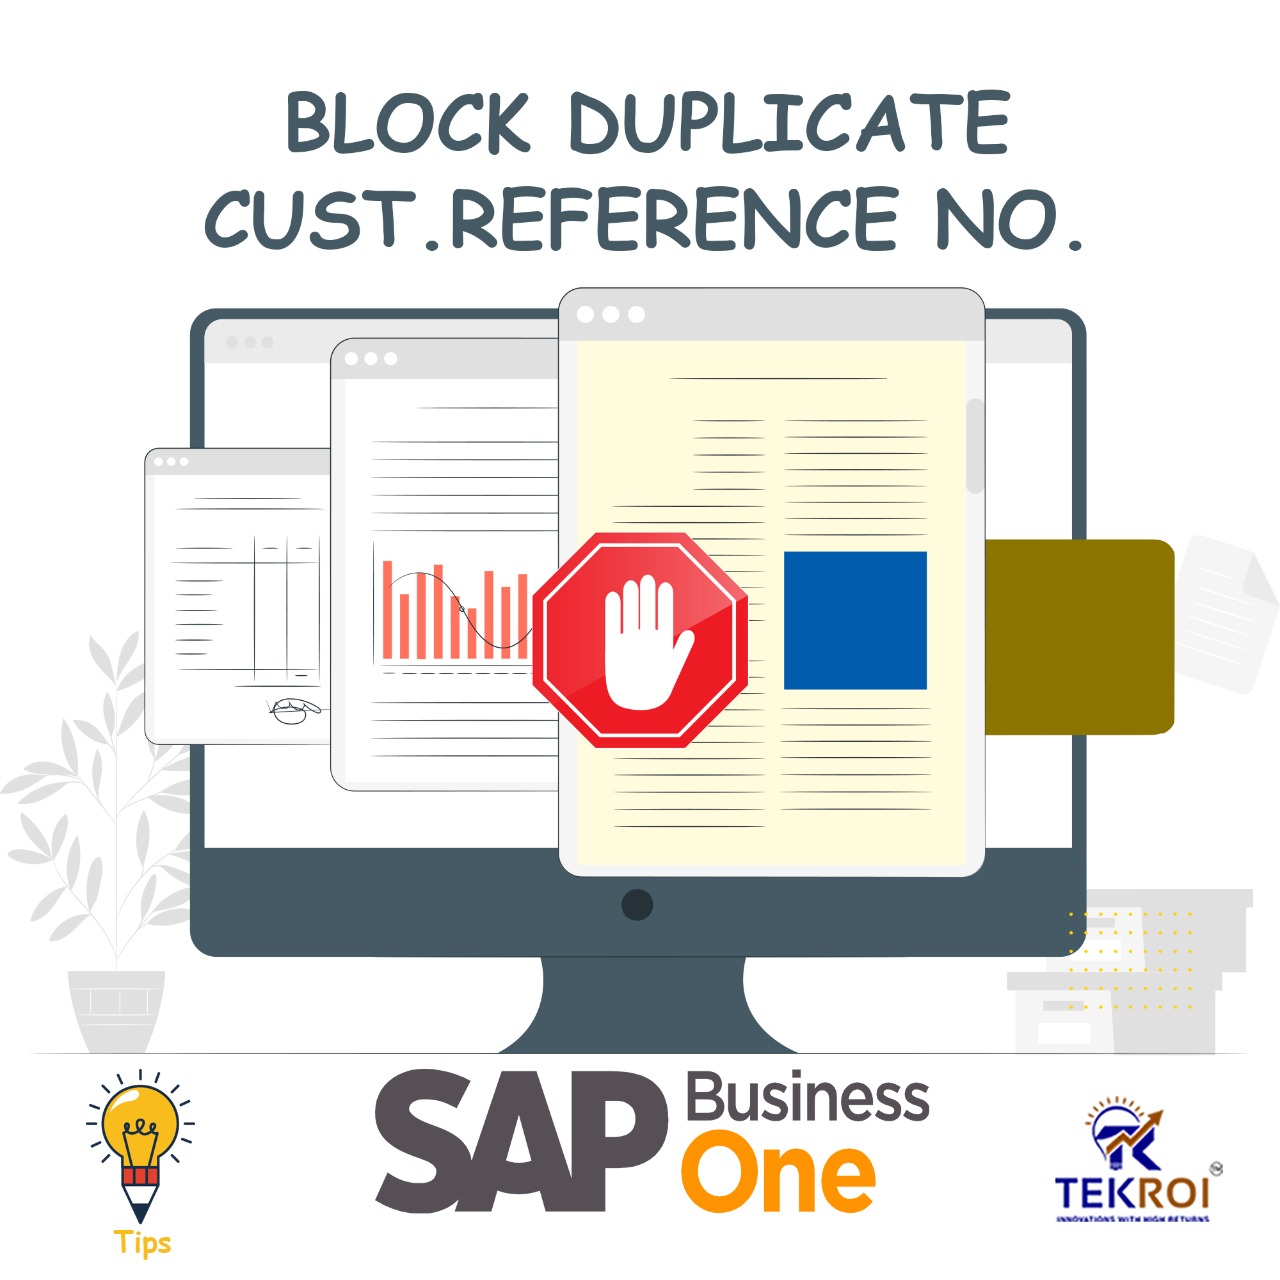 tekroi sap business one Block the Duplicate Customer Reference No.